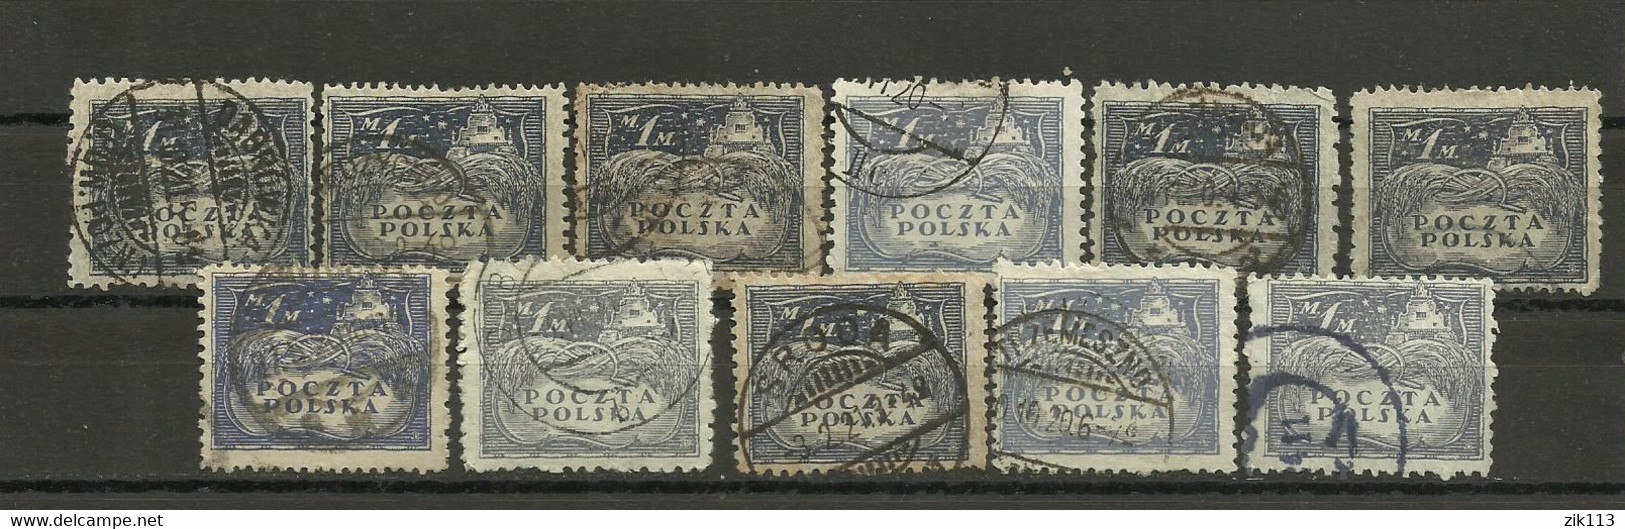 Poland 1919 Different Variants - Used Stamps